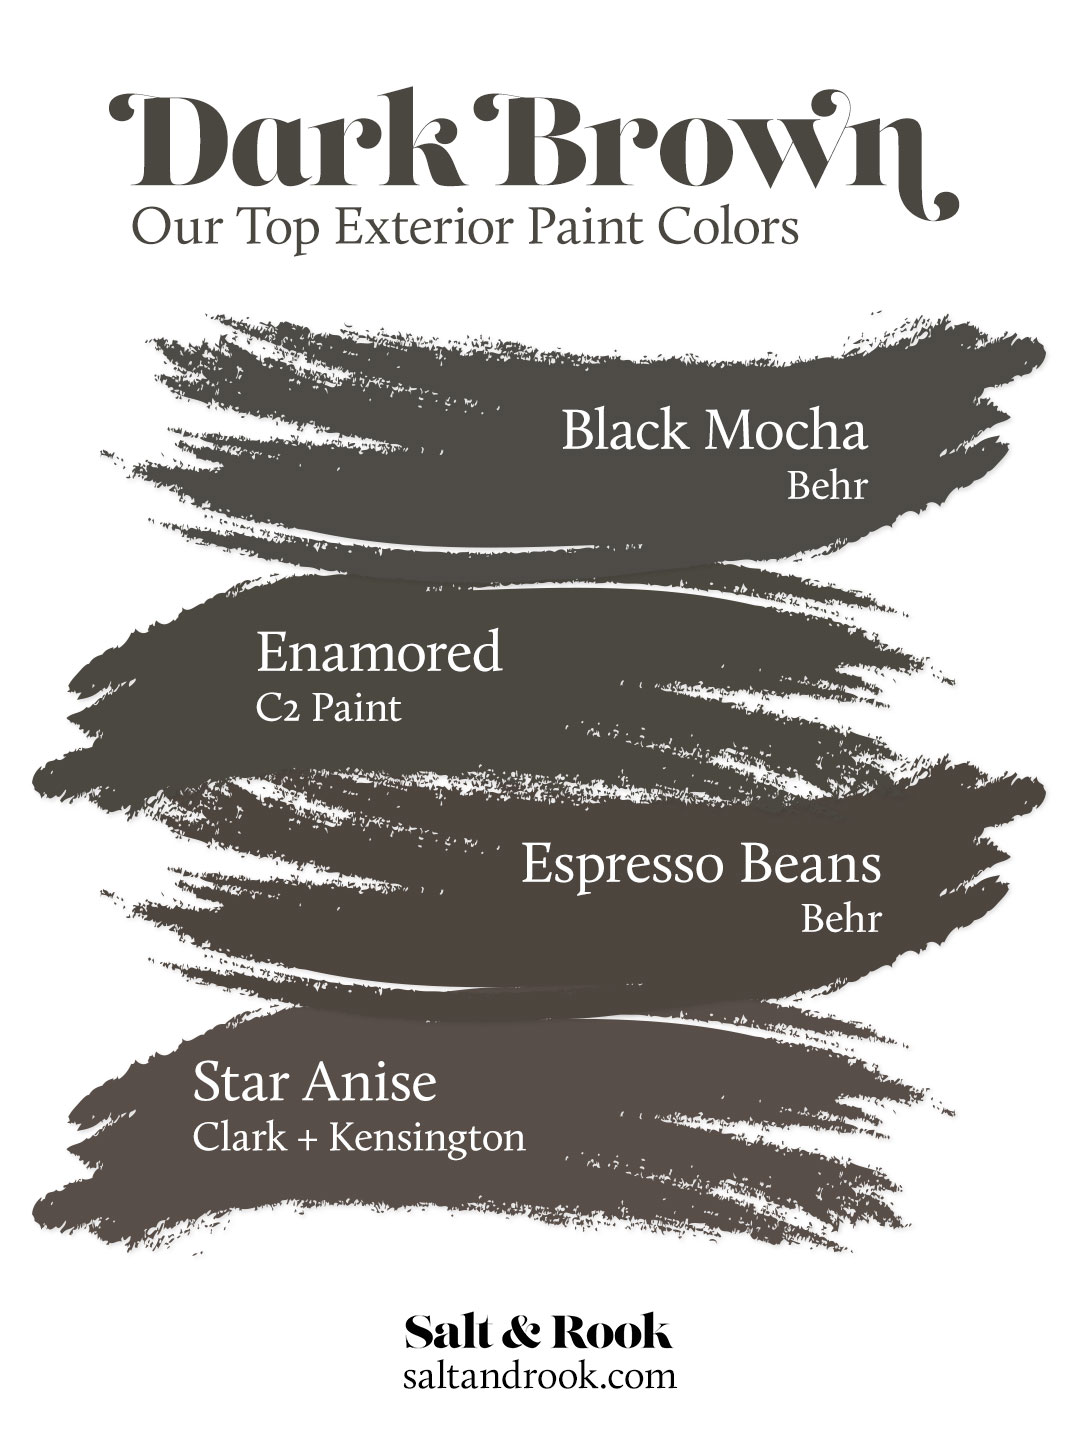 Our Top Dark Brown Exterior Paint Colors for our Dutch Colonial